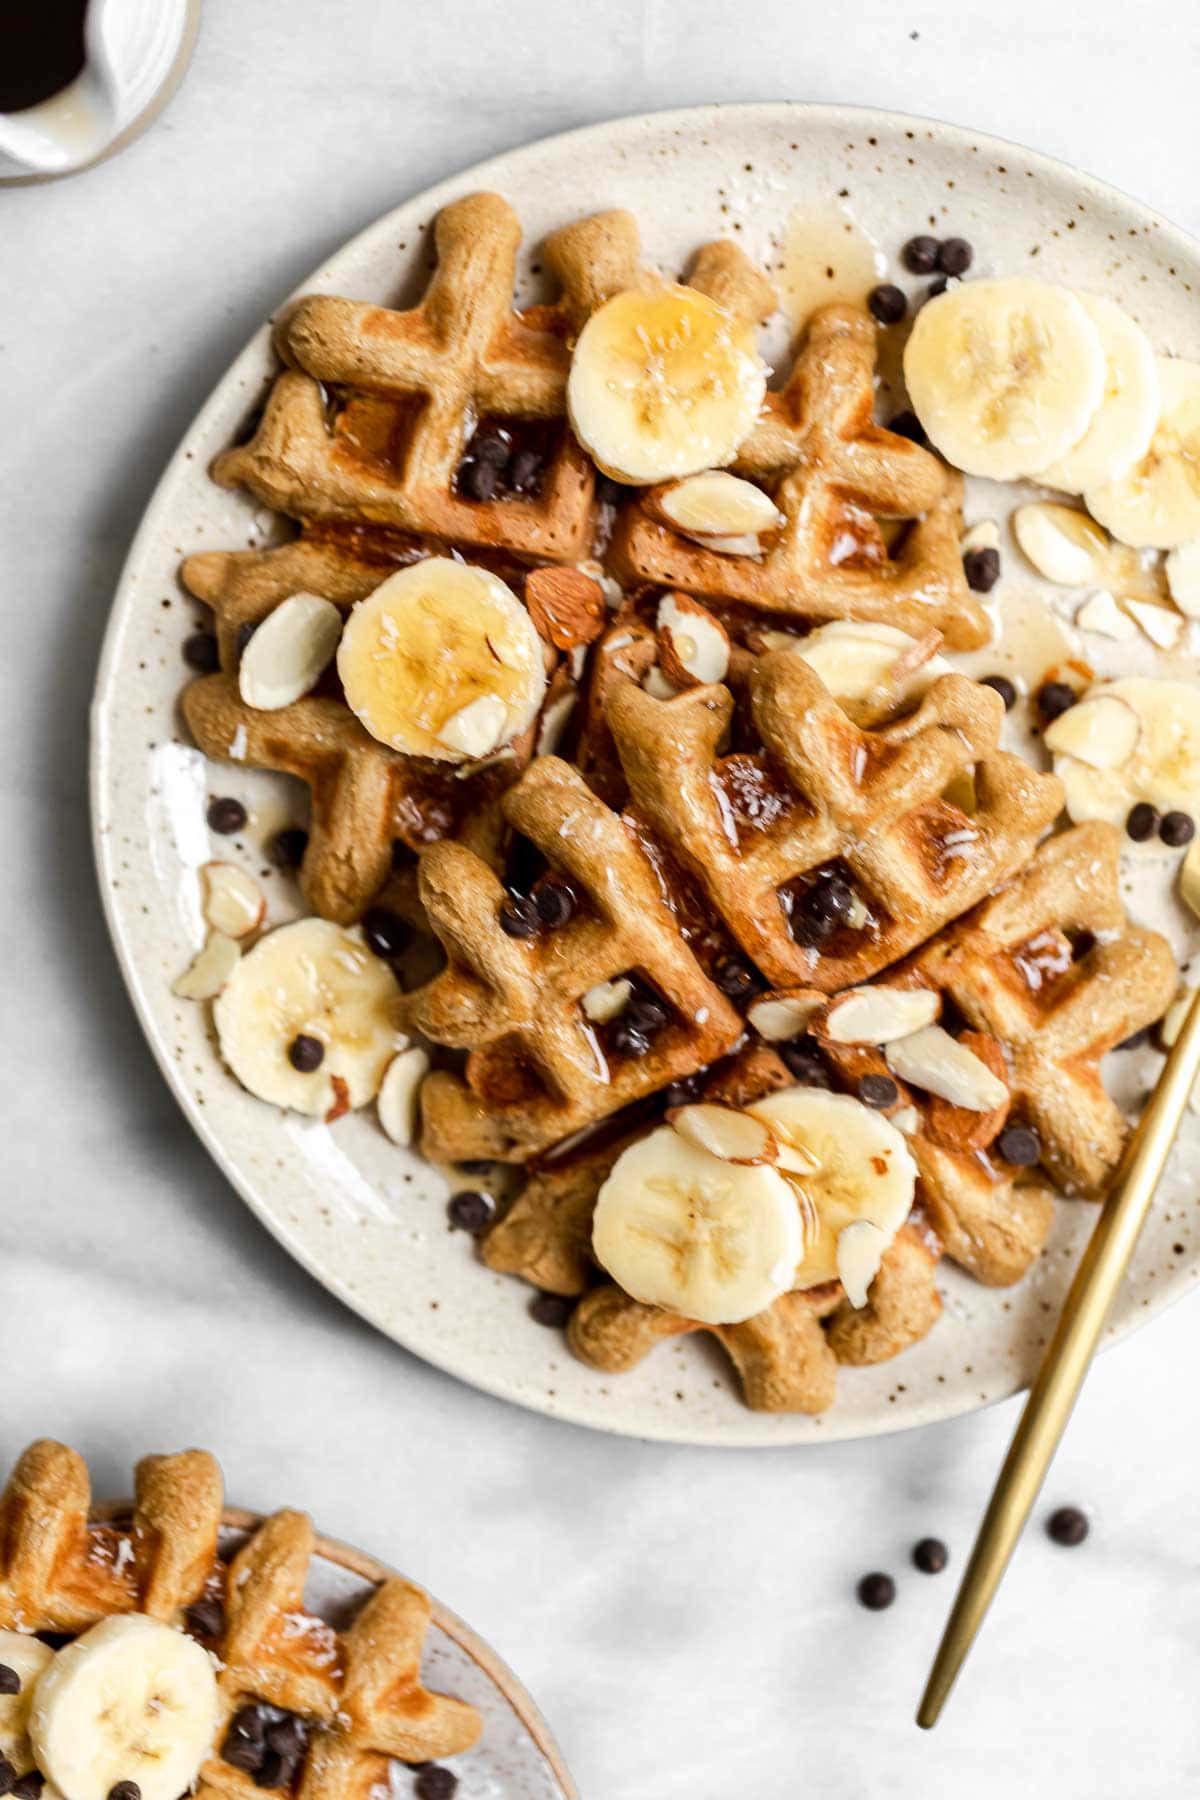 Speckled plate with peanut butter waffles and banana slices.